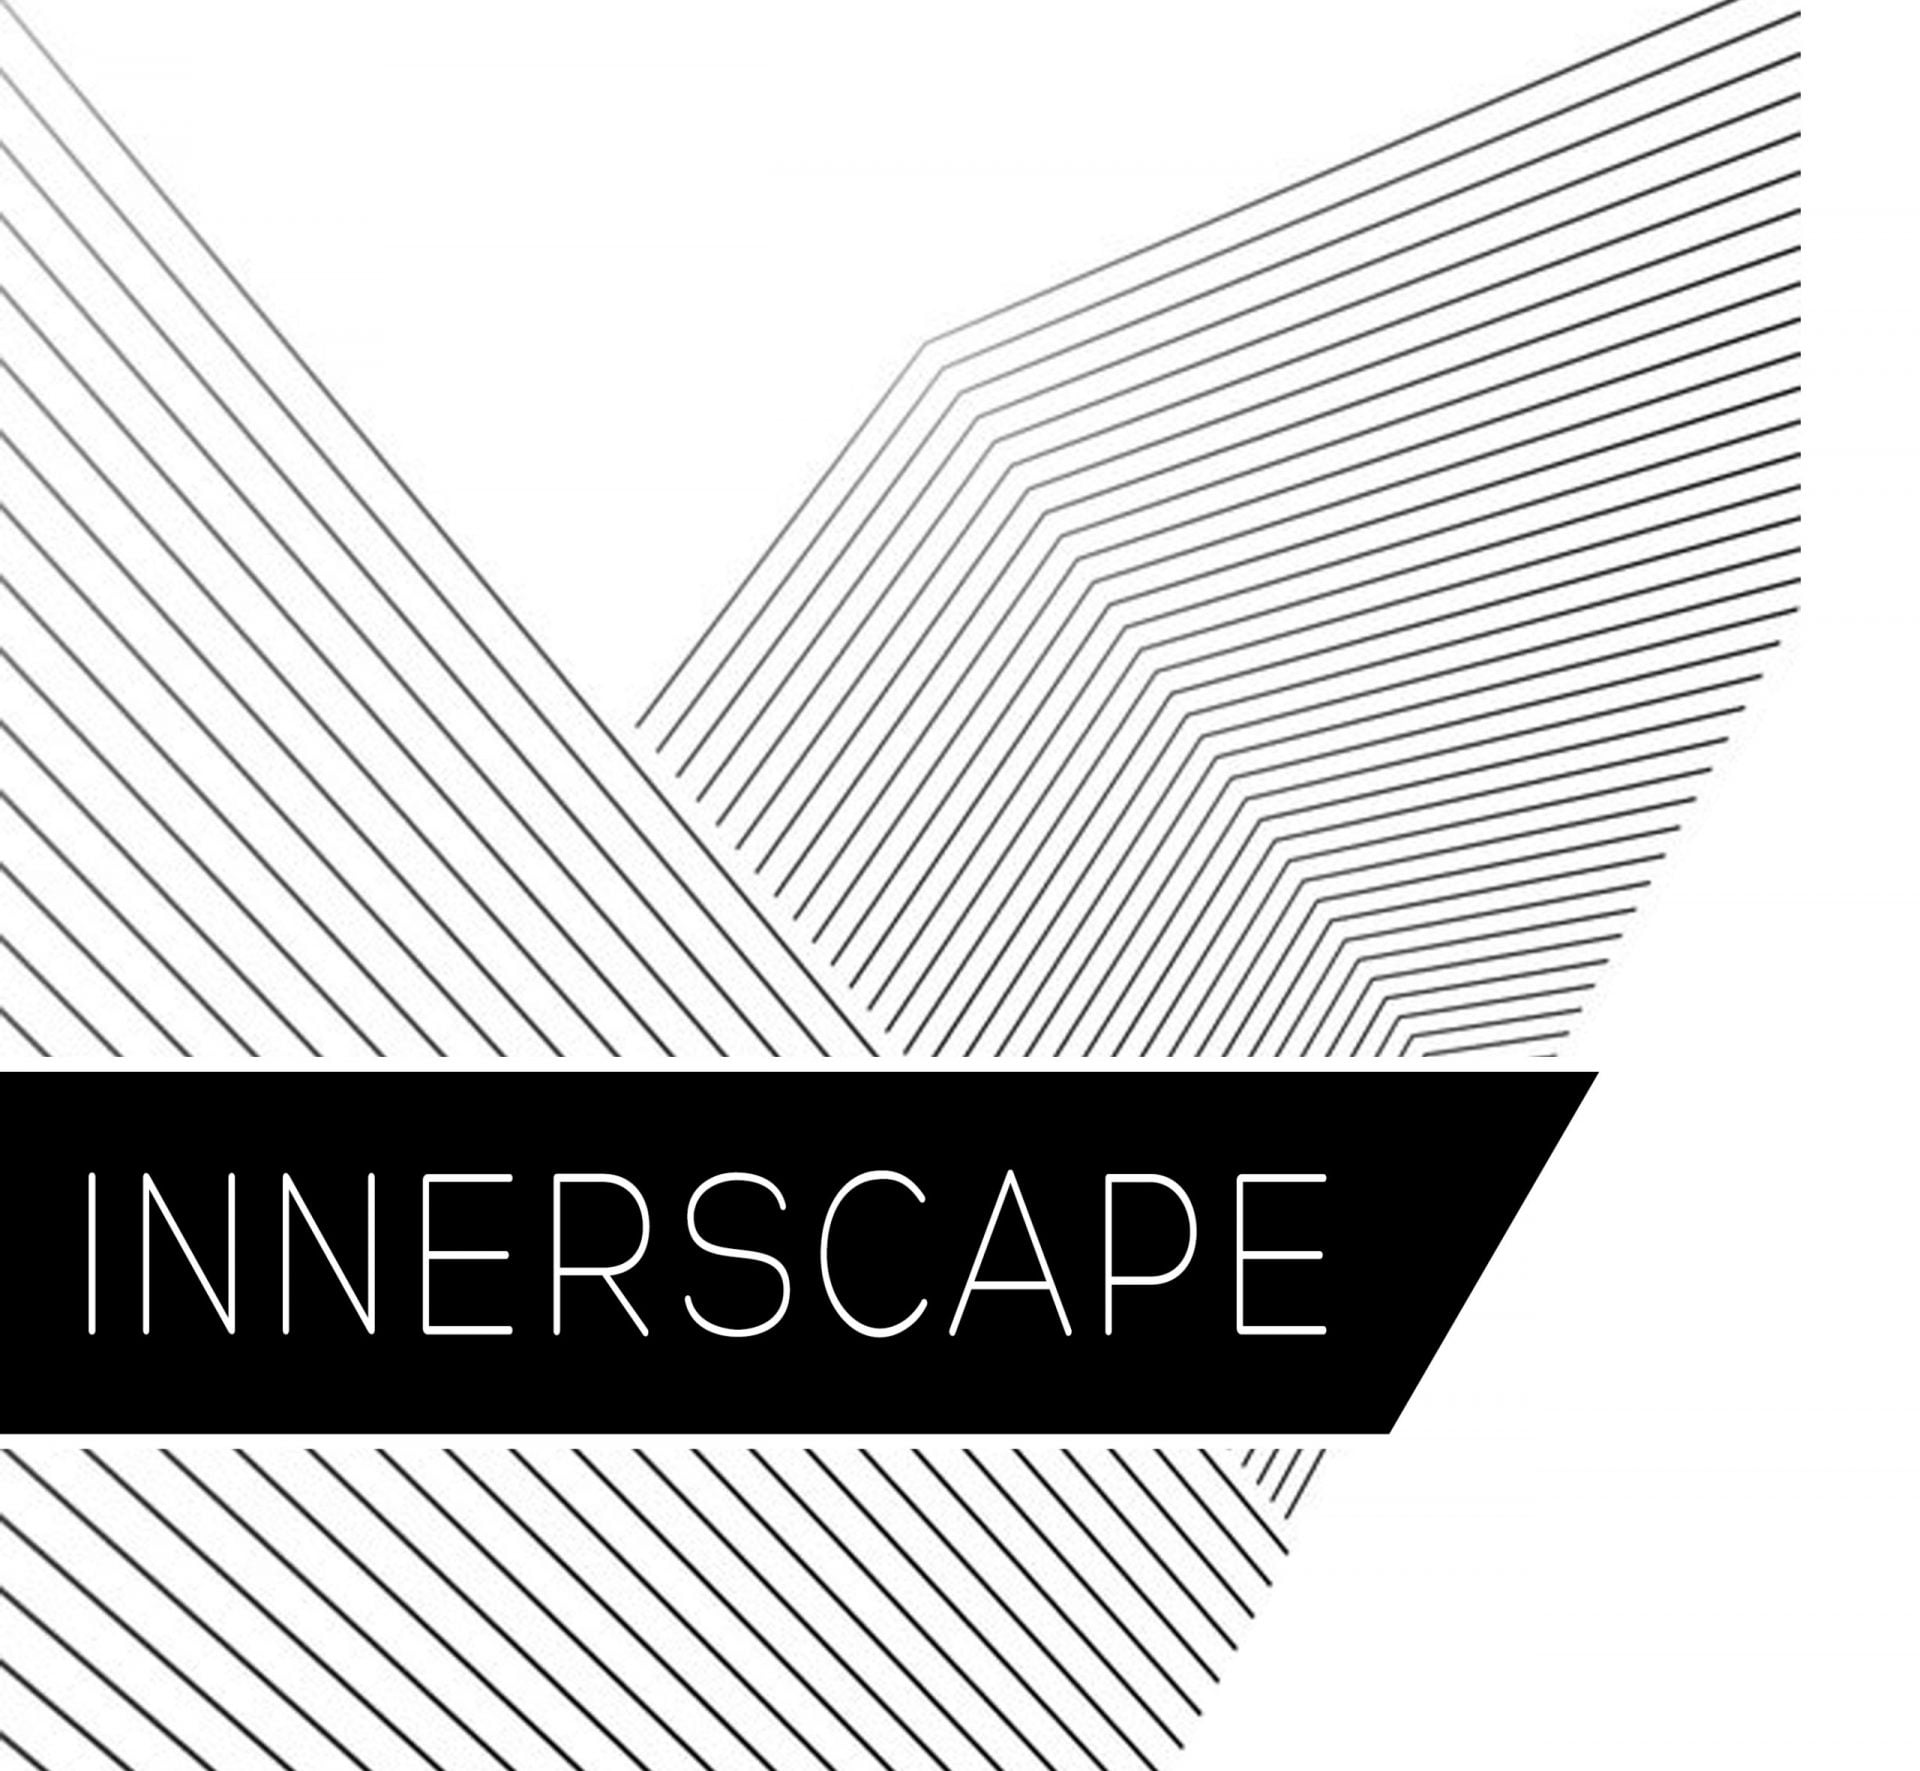 innerscape realease